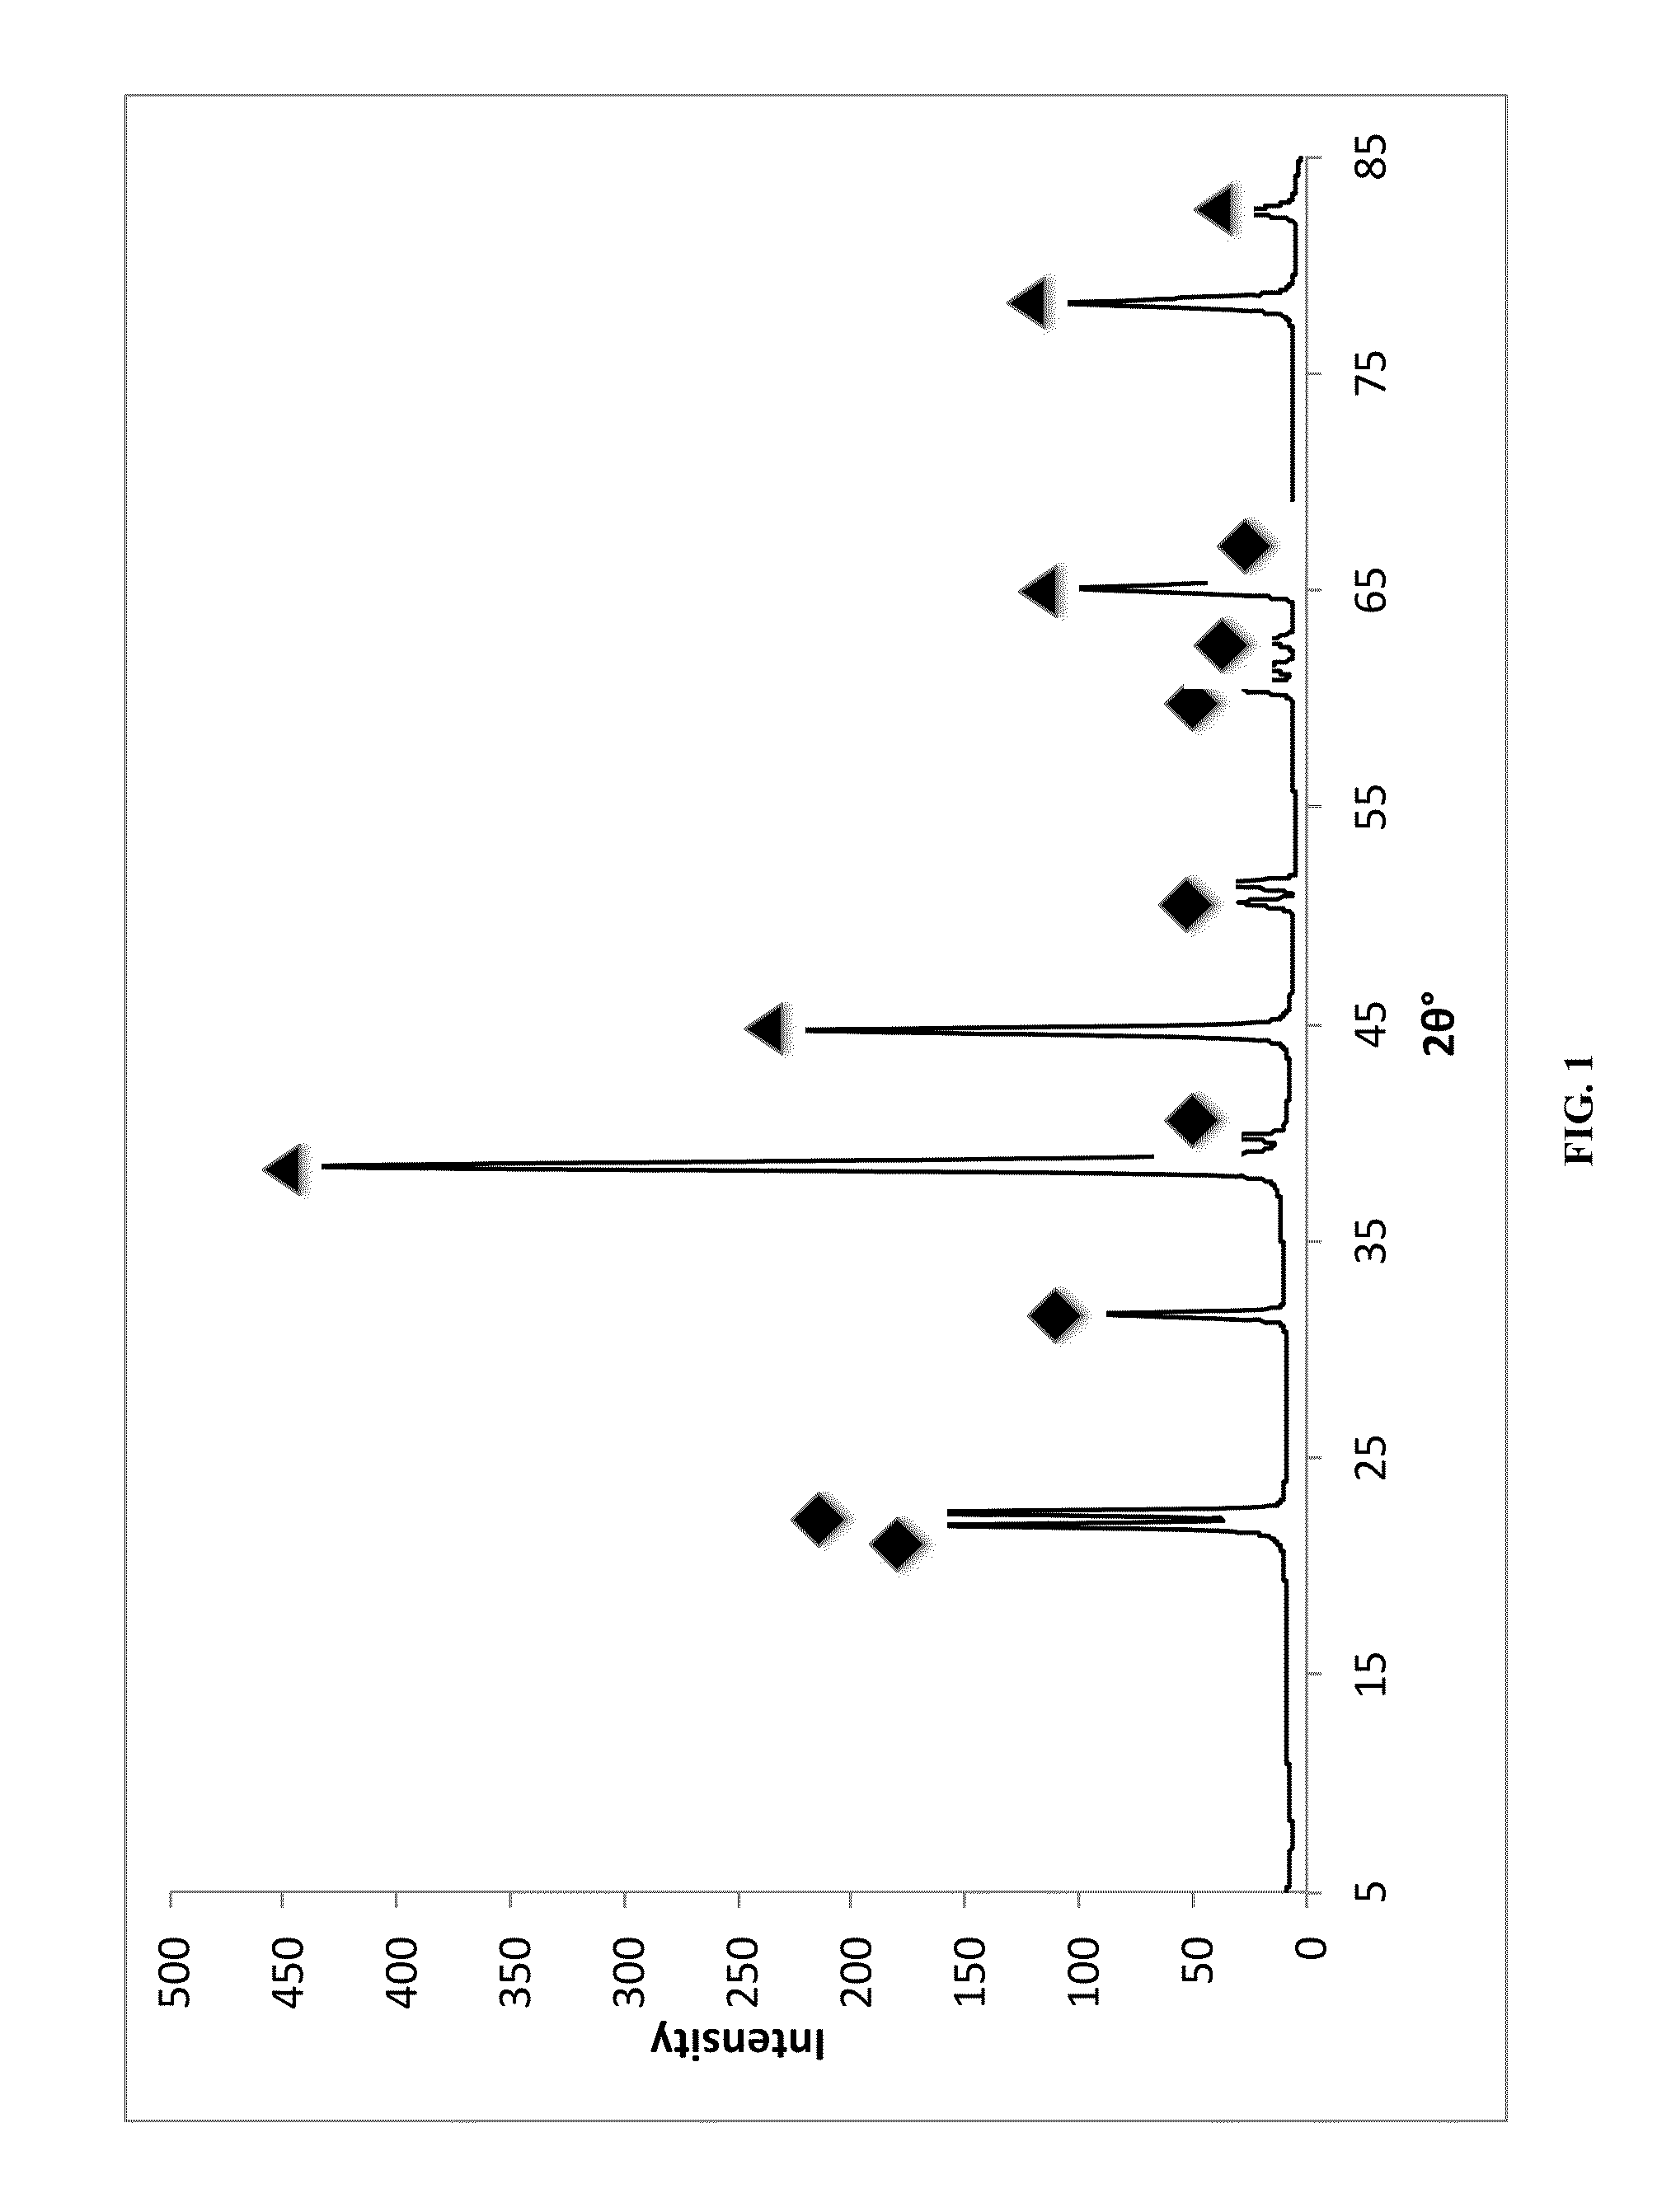 Novel Hydrogen-Evolving Polymer-Capped Aluminum Nanoparticles, Composites, and Methods of Synthesis Using Lithium Aluminum Hydride